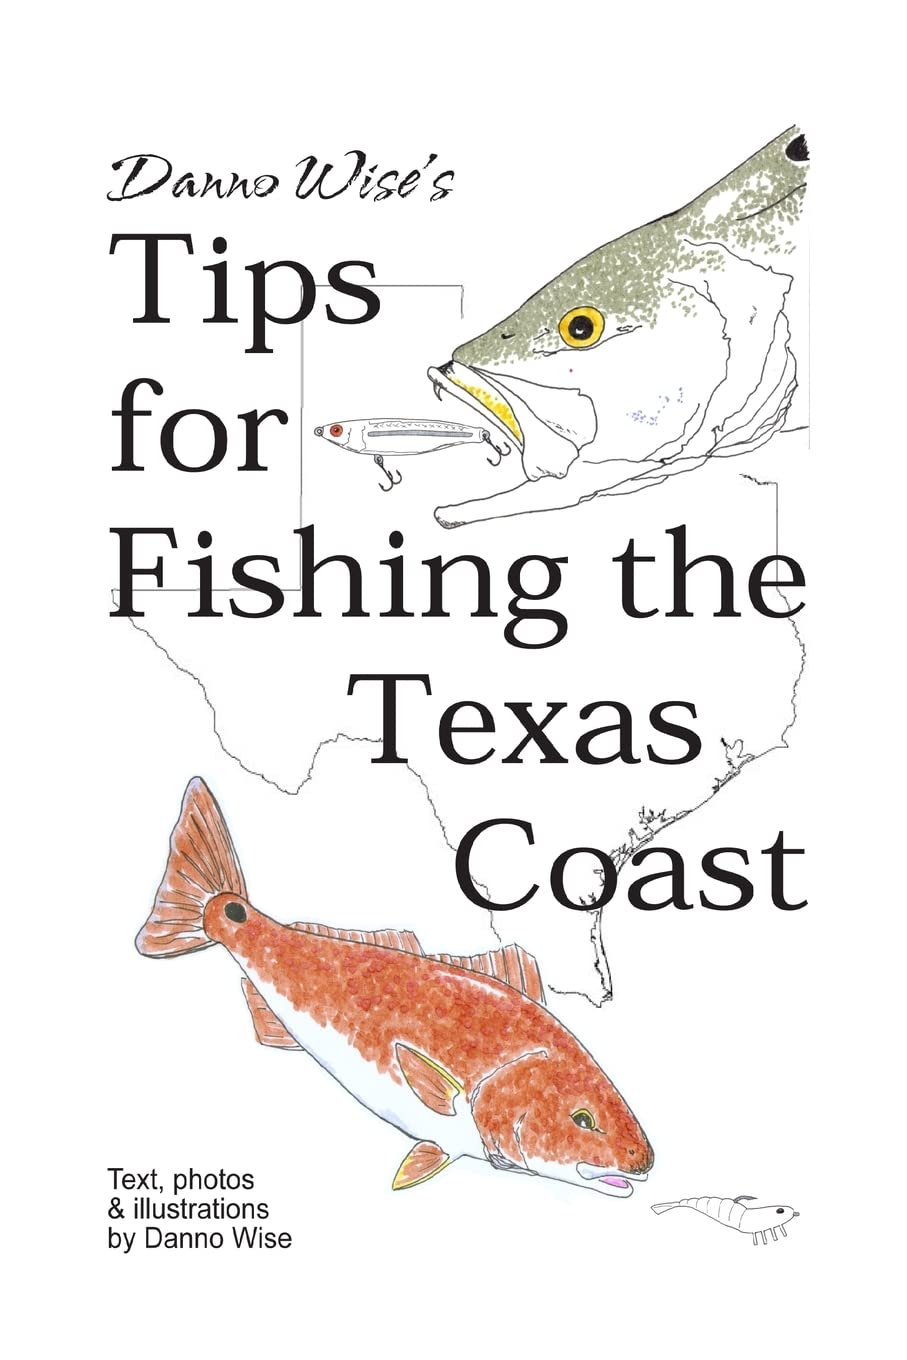 Danno Wise's Tips for Fishing the Texas Coast